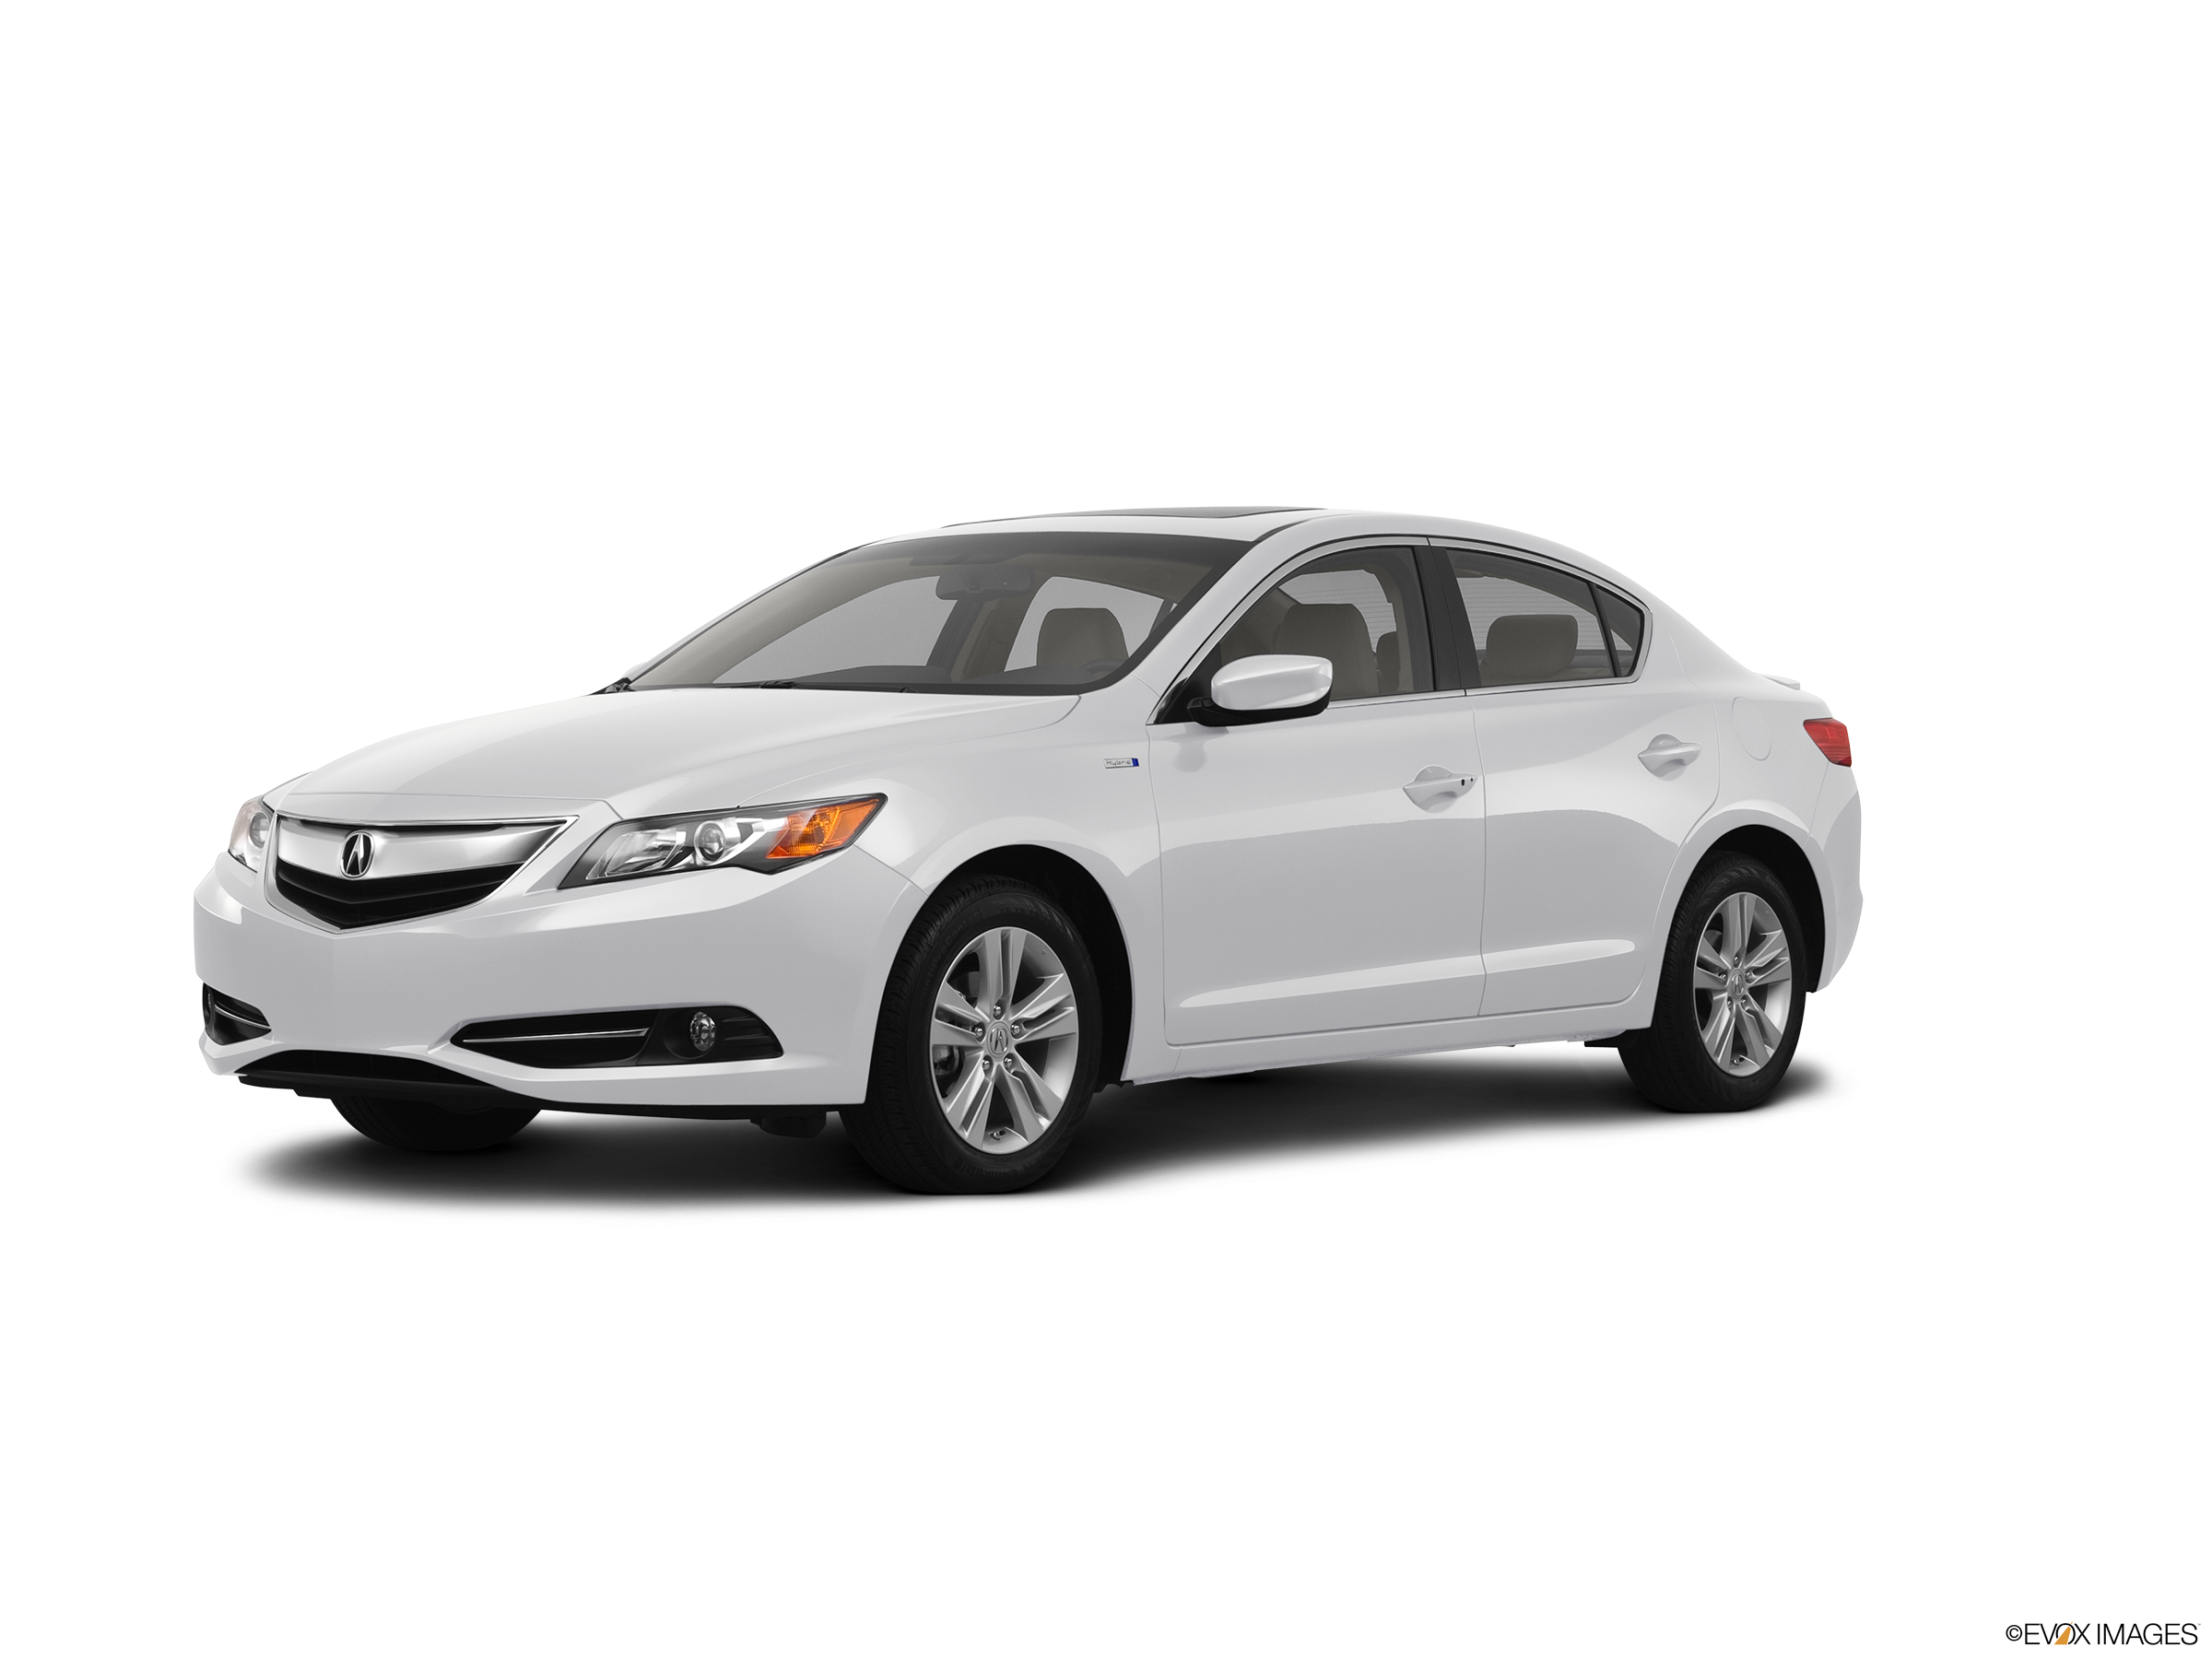 2013 Acura Ilx Price Kbb Value Cars For Sale Kelley Blue Book